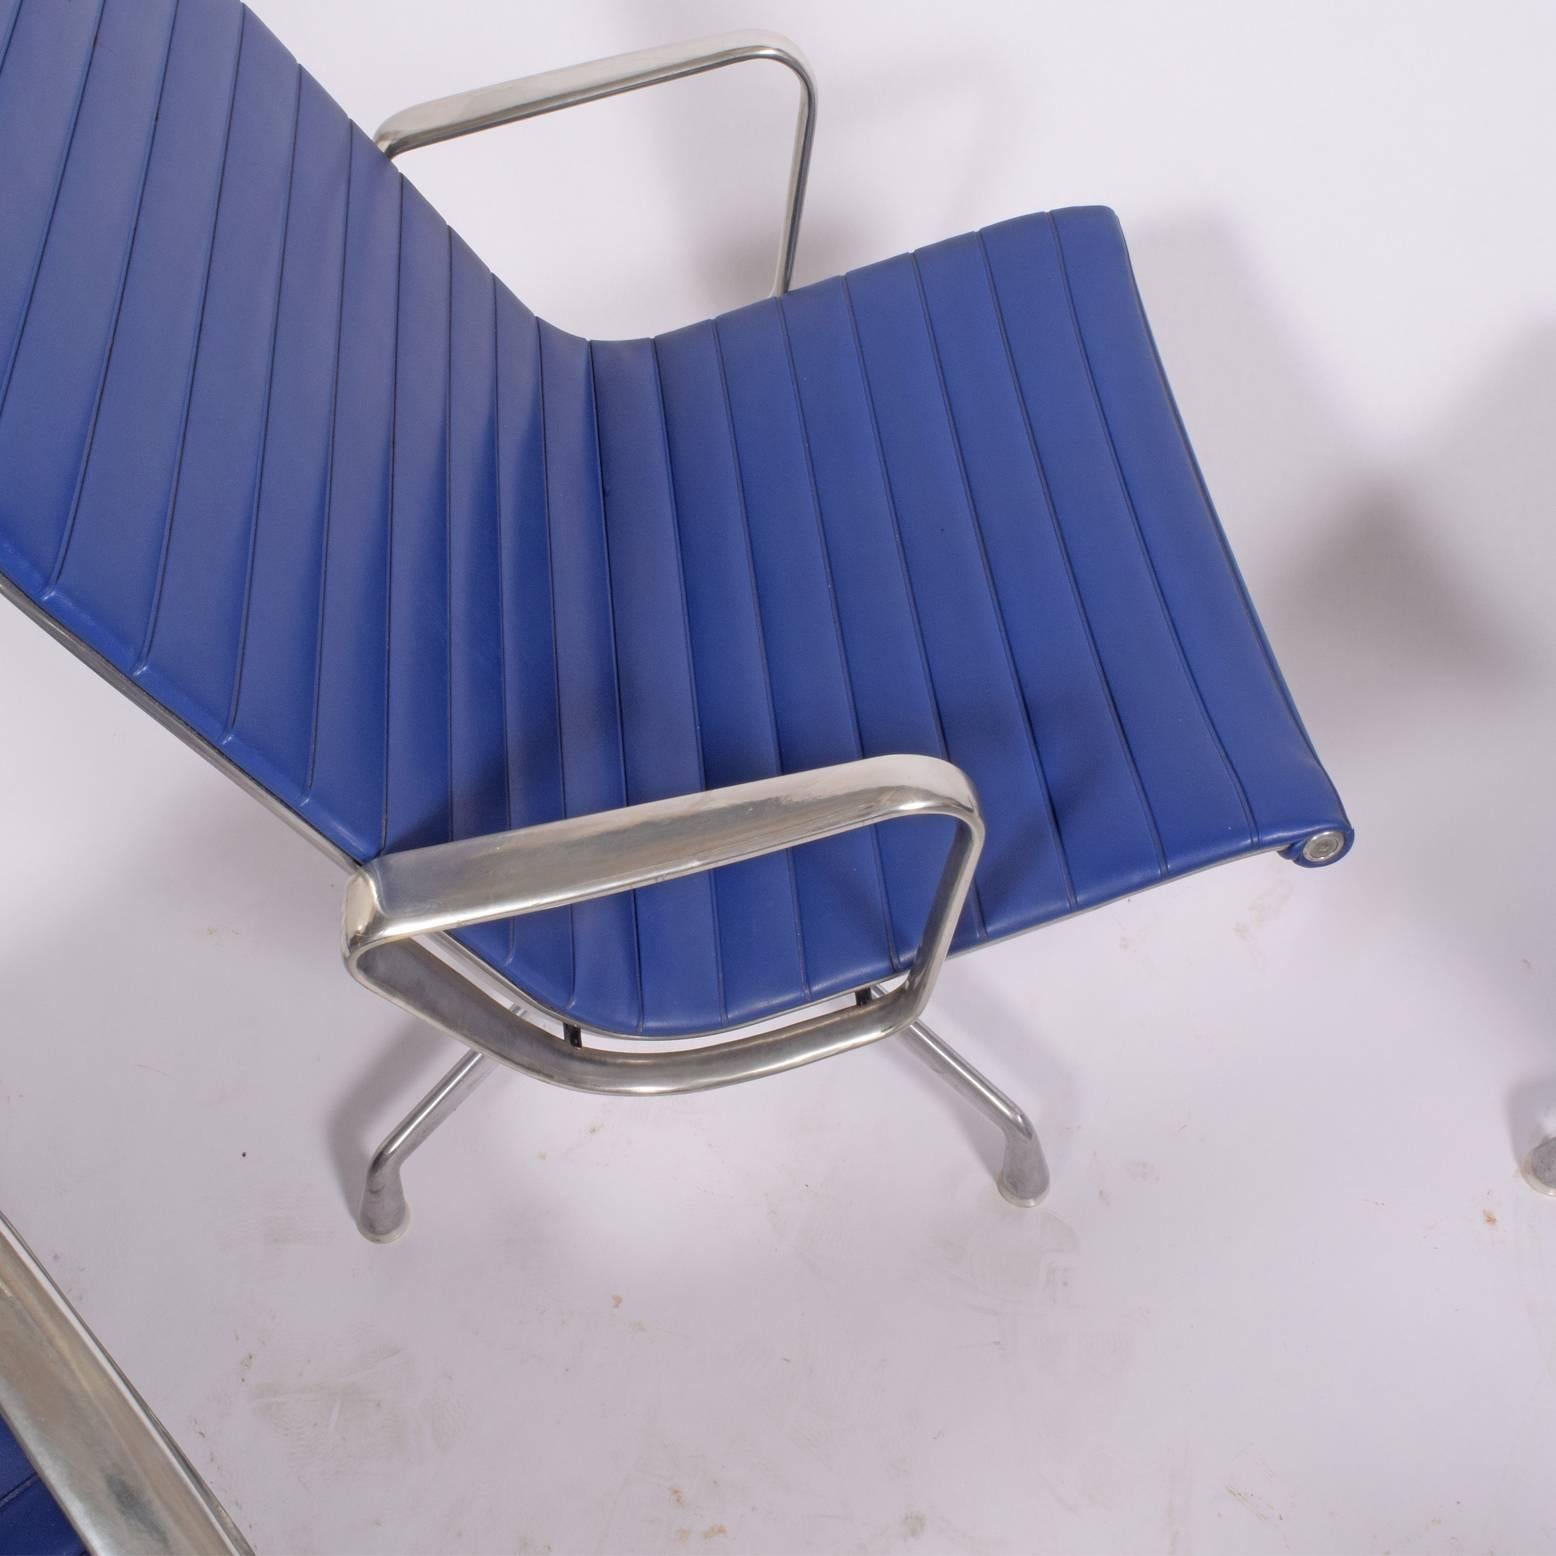 Mid-20th Century Only two Aluminium Group Chairs by Charles Eames for Herman Miller